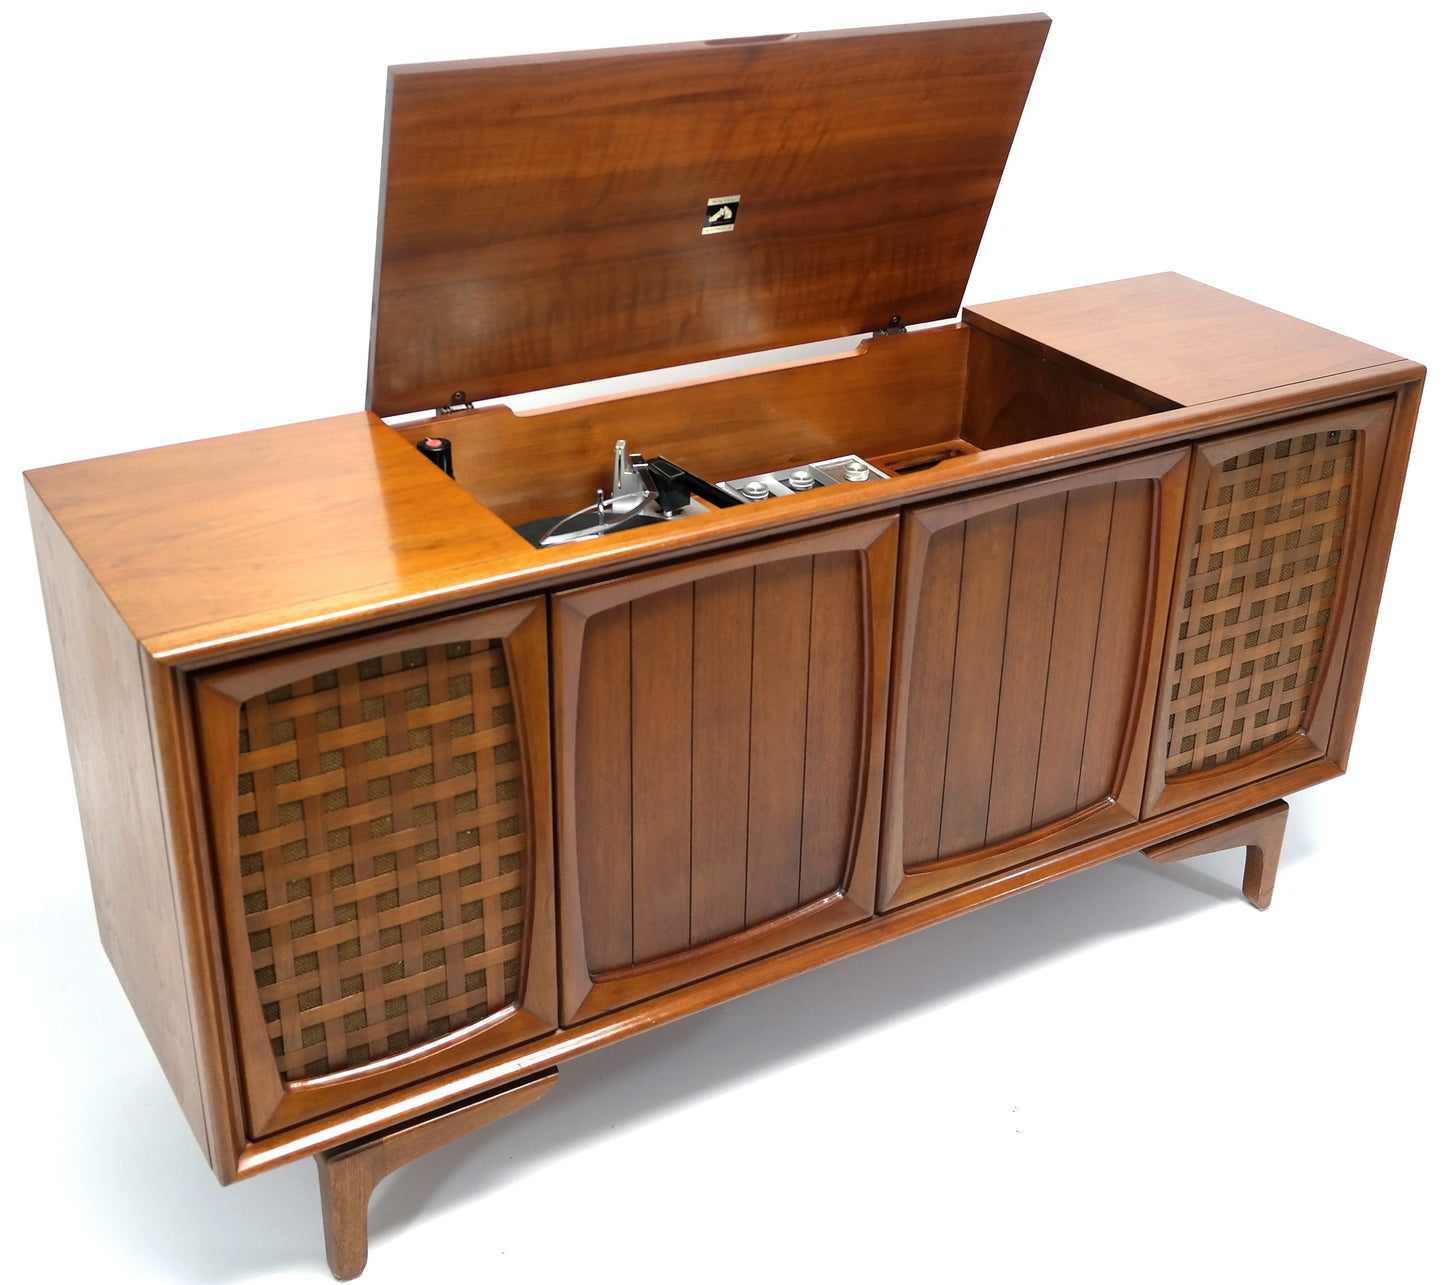 Mid Century Modern RCA STEREO CONSOLE - 50's - Mid Century RCA Record Player - Bluetooth - AM FM The Vintedge Co.